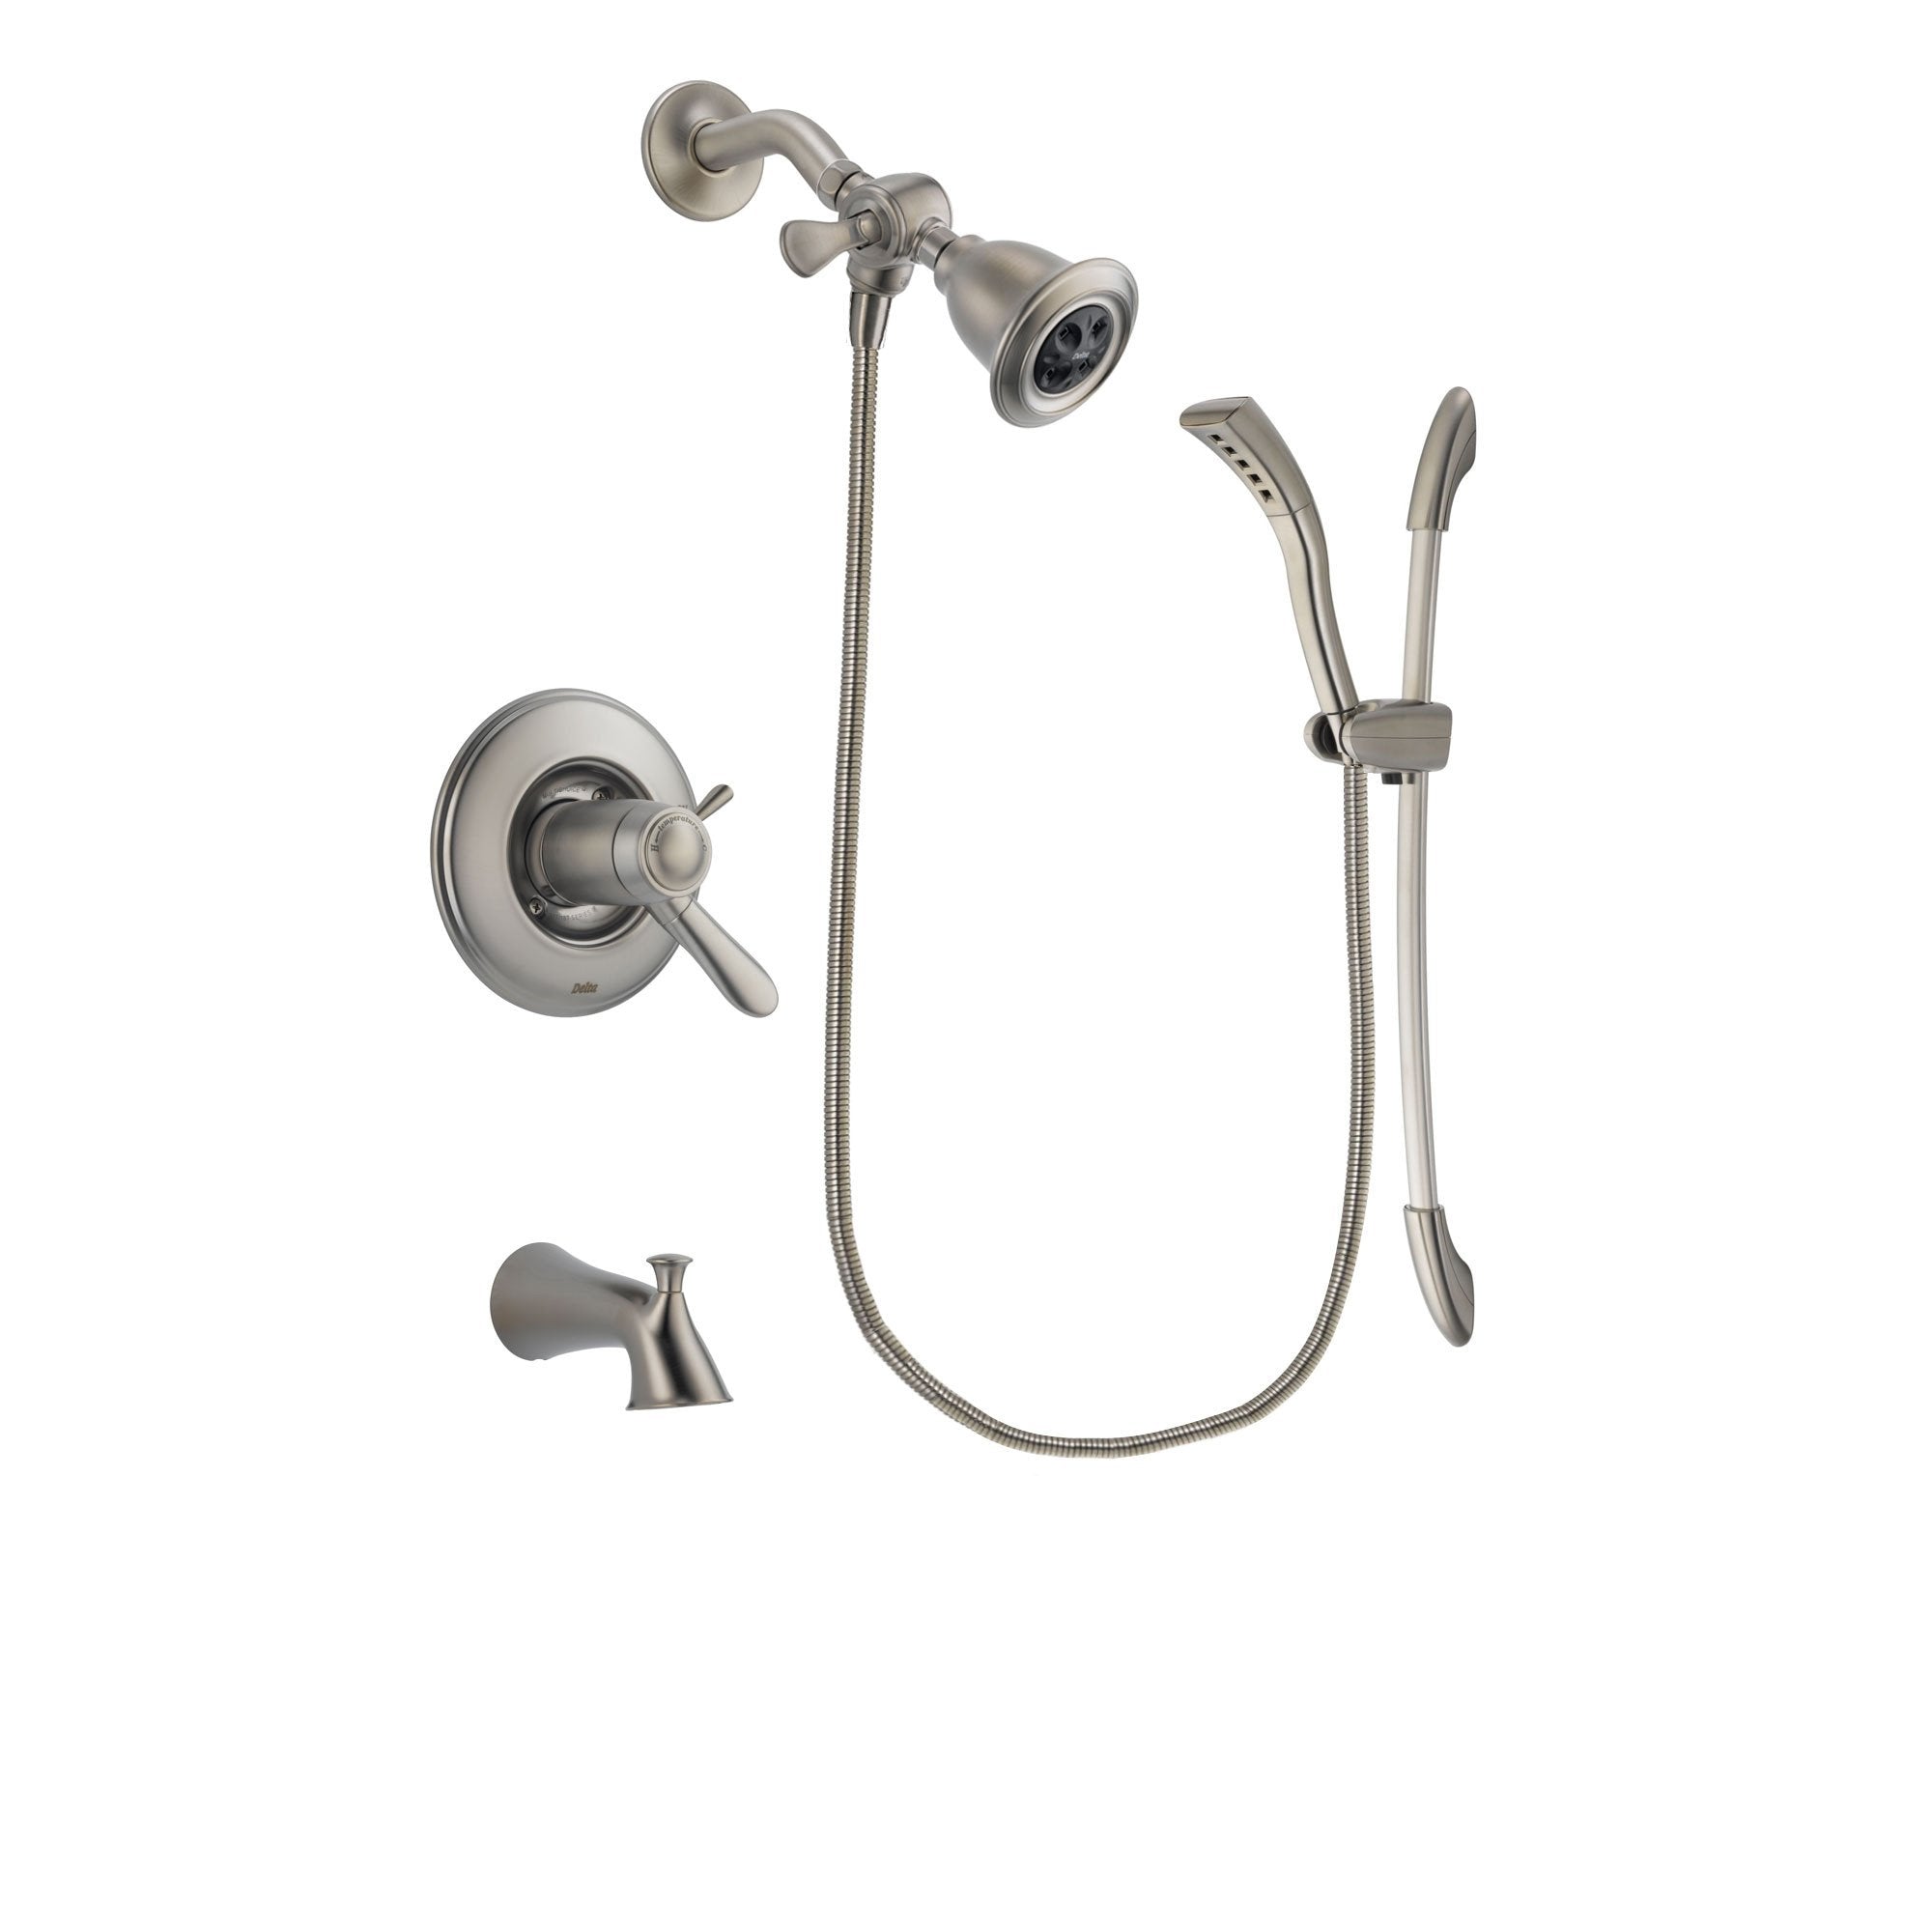 Delta Lahara Stainless Steel Finish Thermostatic Tub and Shower Faucet System Package with Water Efficient Showerhead and Handshower with Slide Bar Includes Rough-in Valve and Tub Spout DSP1411V